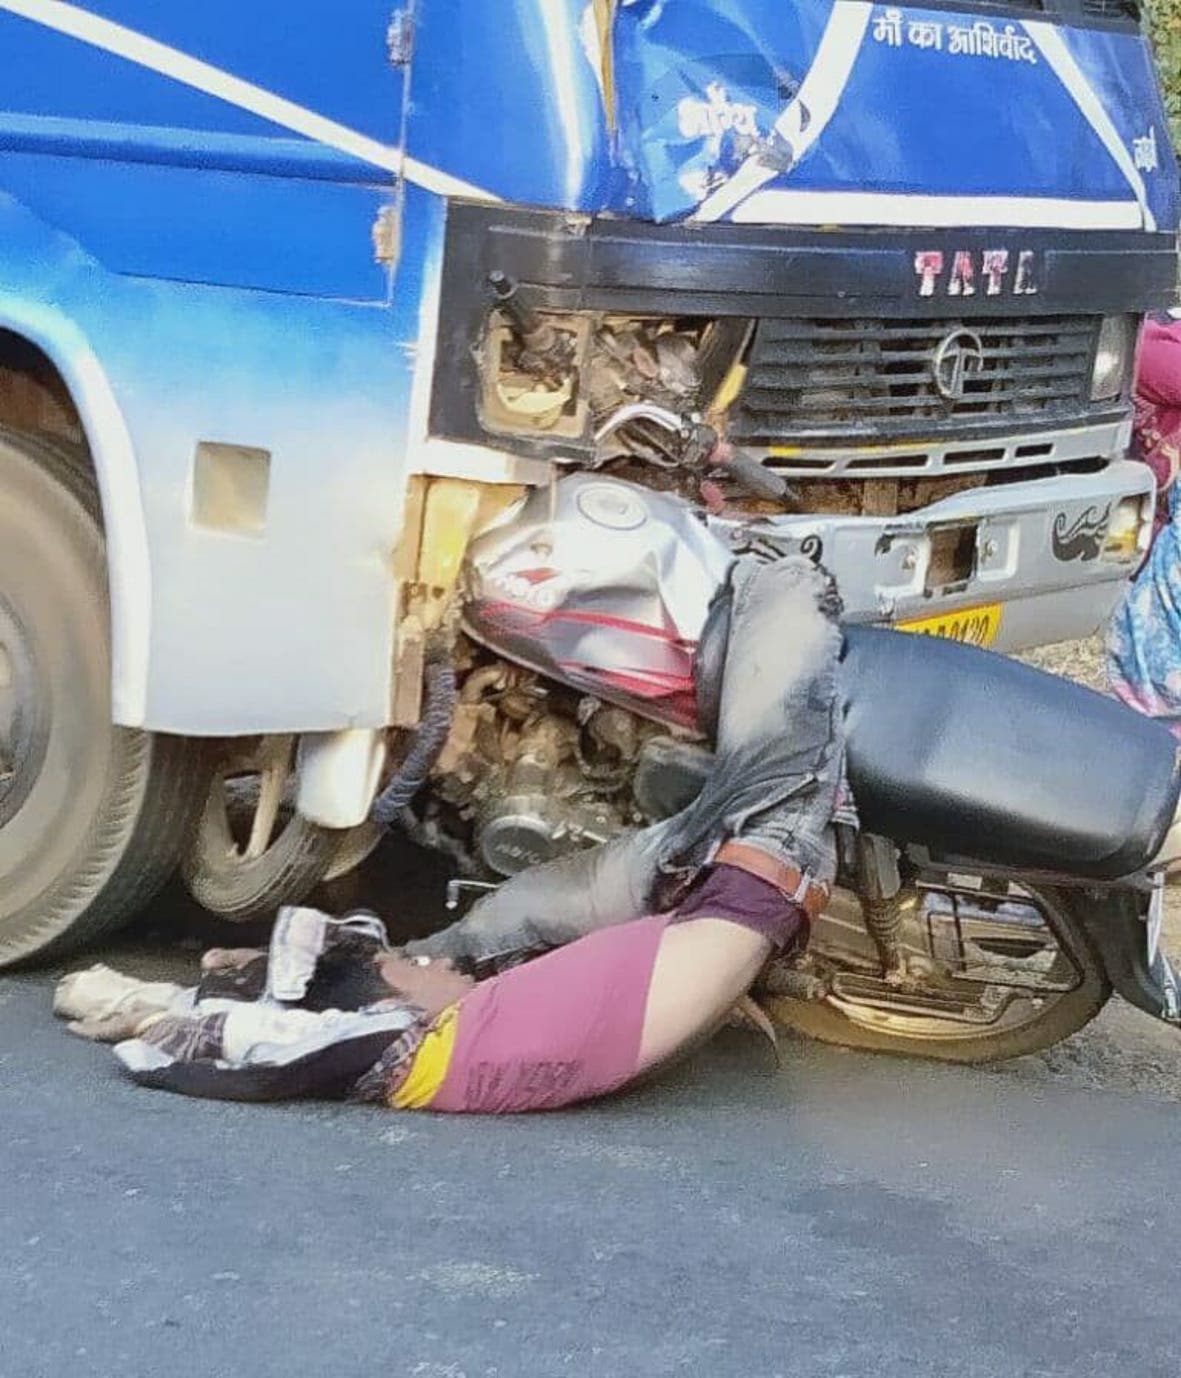 Youth dies in bus and bike collision